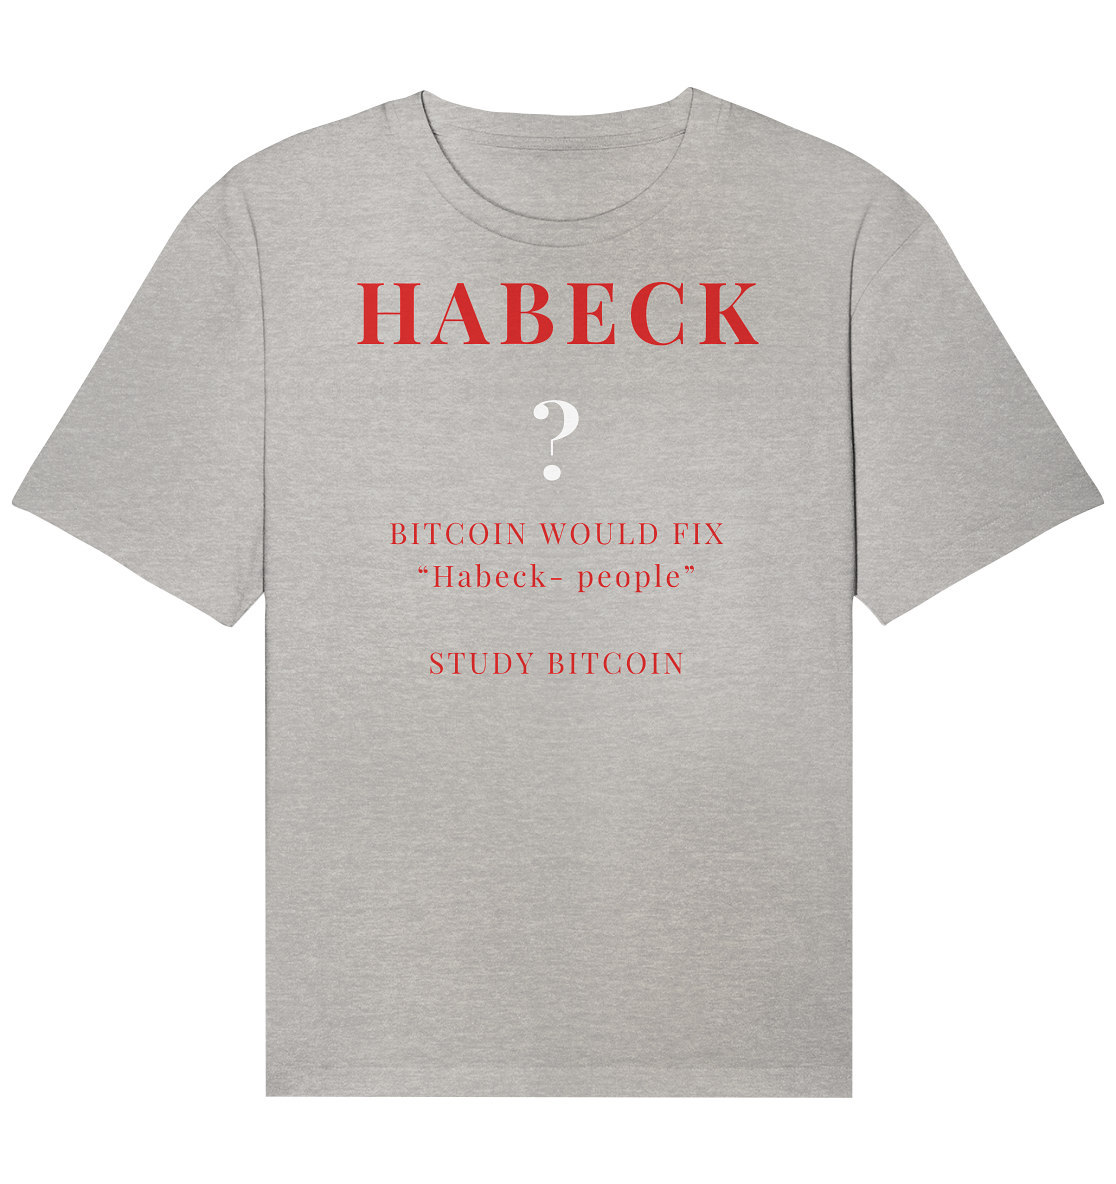 HABECK ? BITCOIN WOULD FIX "Habeck people" - STUDY BITCOIN  - Organic Relaxed Shirt